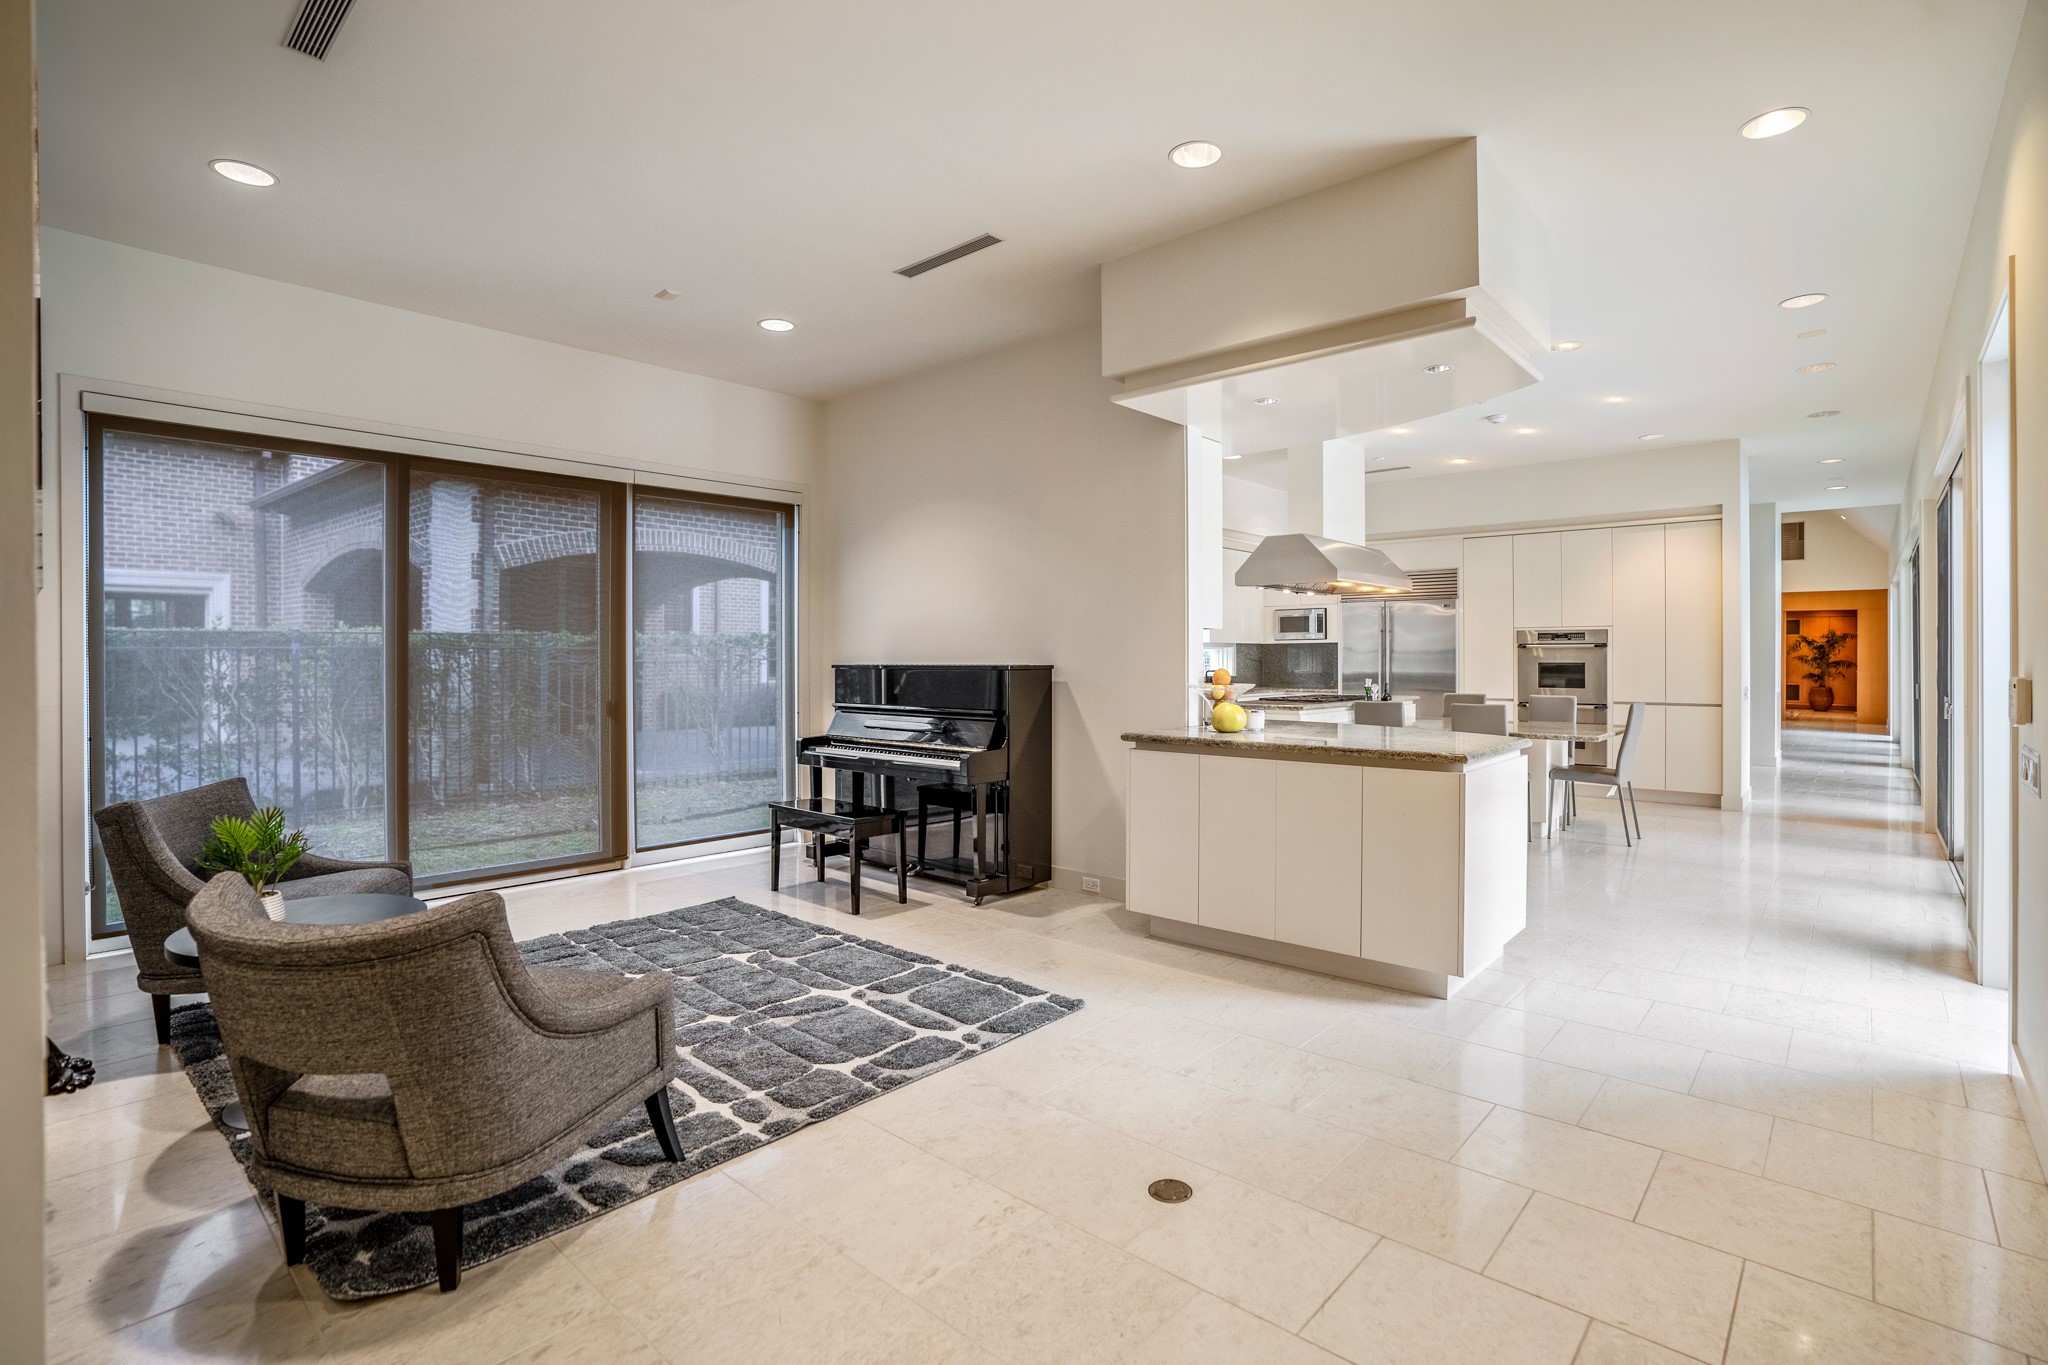 Just behind the kitchen is another flex space, flanked by windows/sliding glass doors on both sides. This flex space can be a play area for the kids, sitting room, reading room, or even workout space.